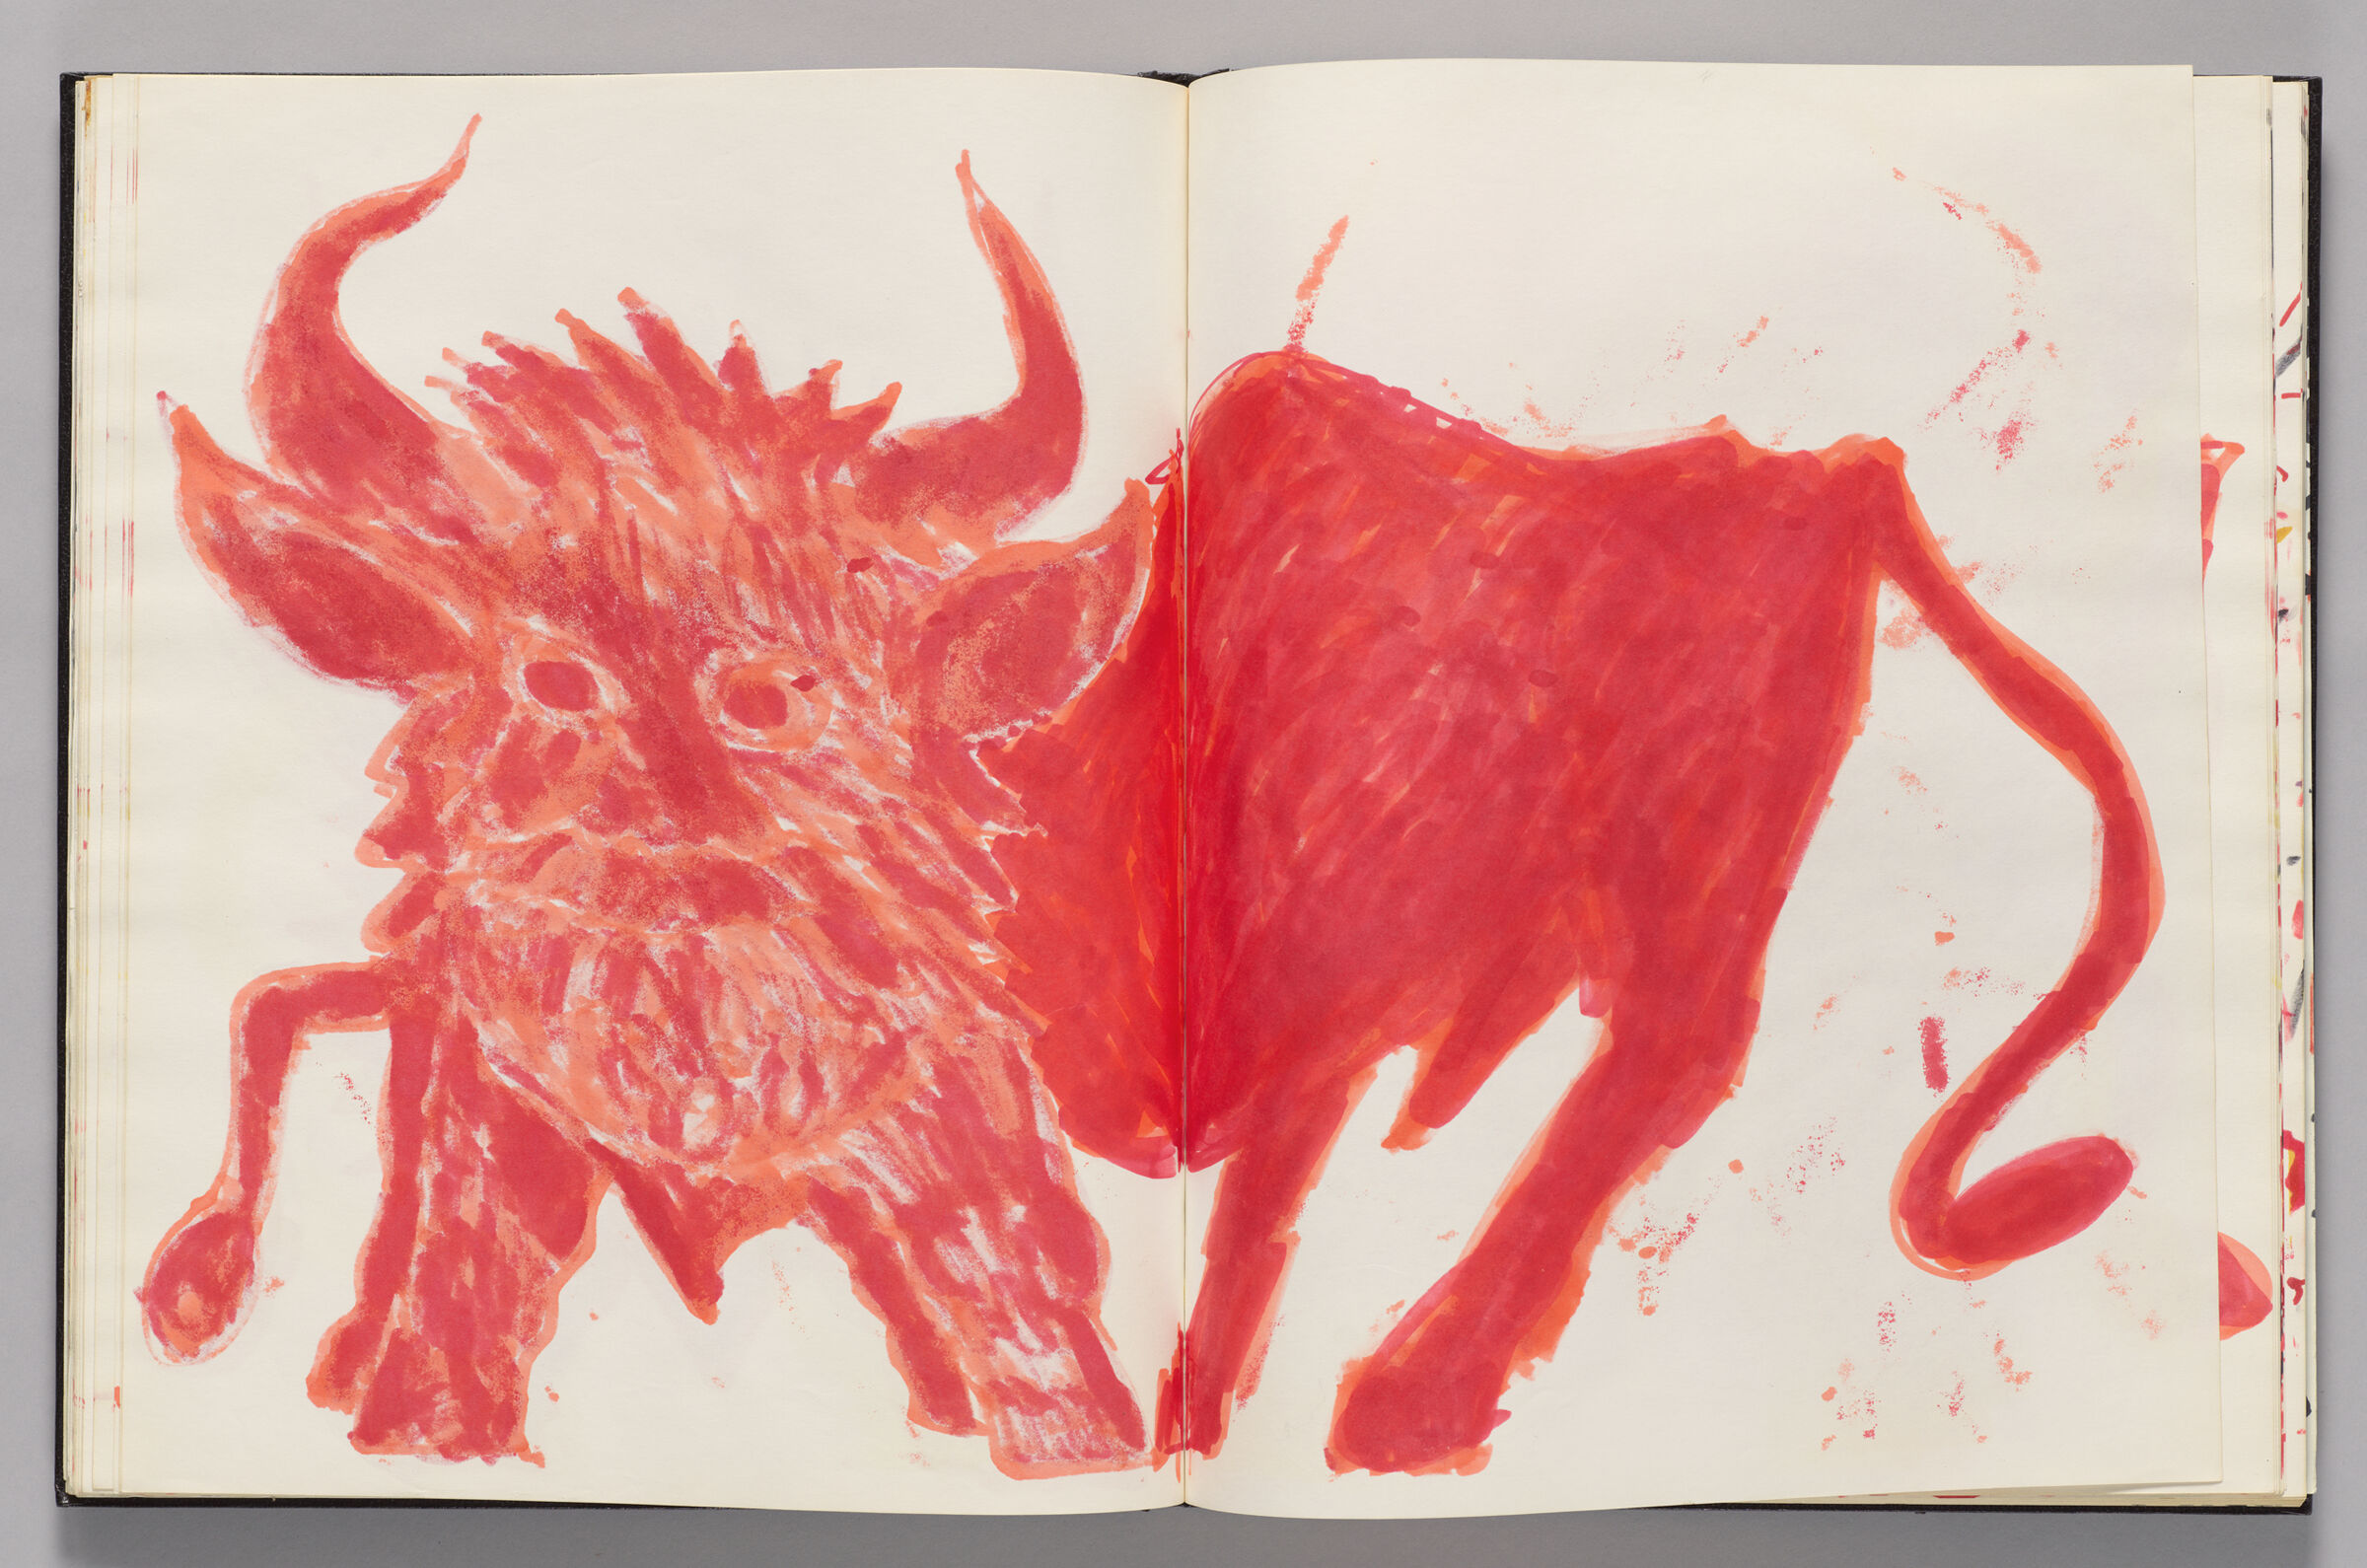 Untitled (Bleed-Through Of Minotaur Head Connected To Minotaur Body, Two-Page Spread)